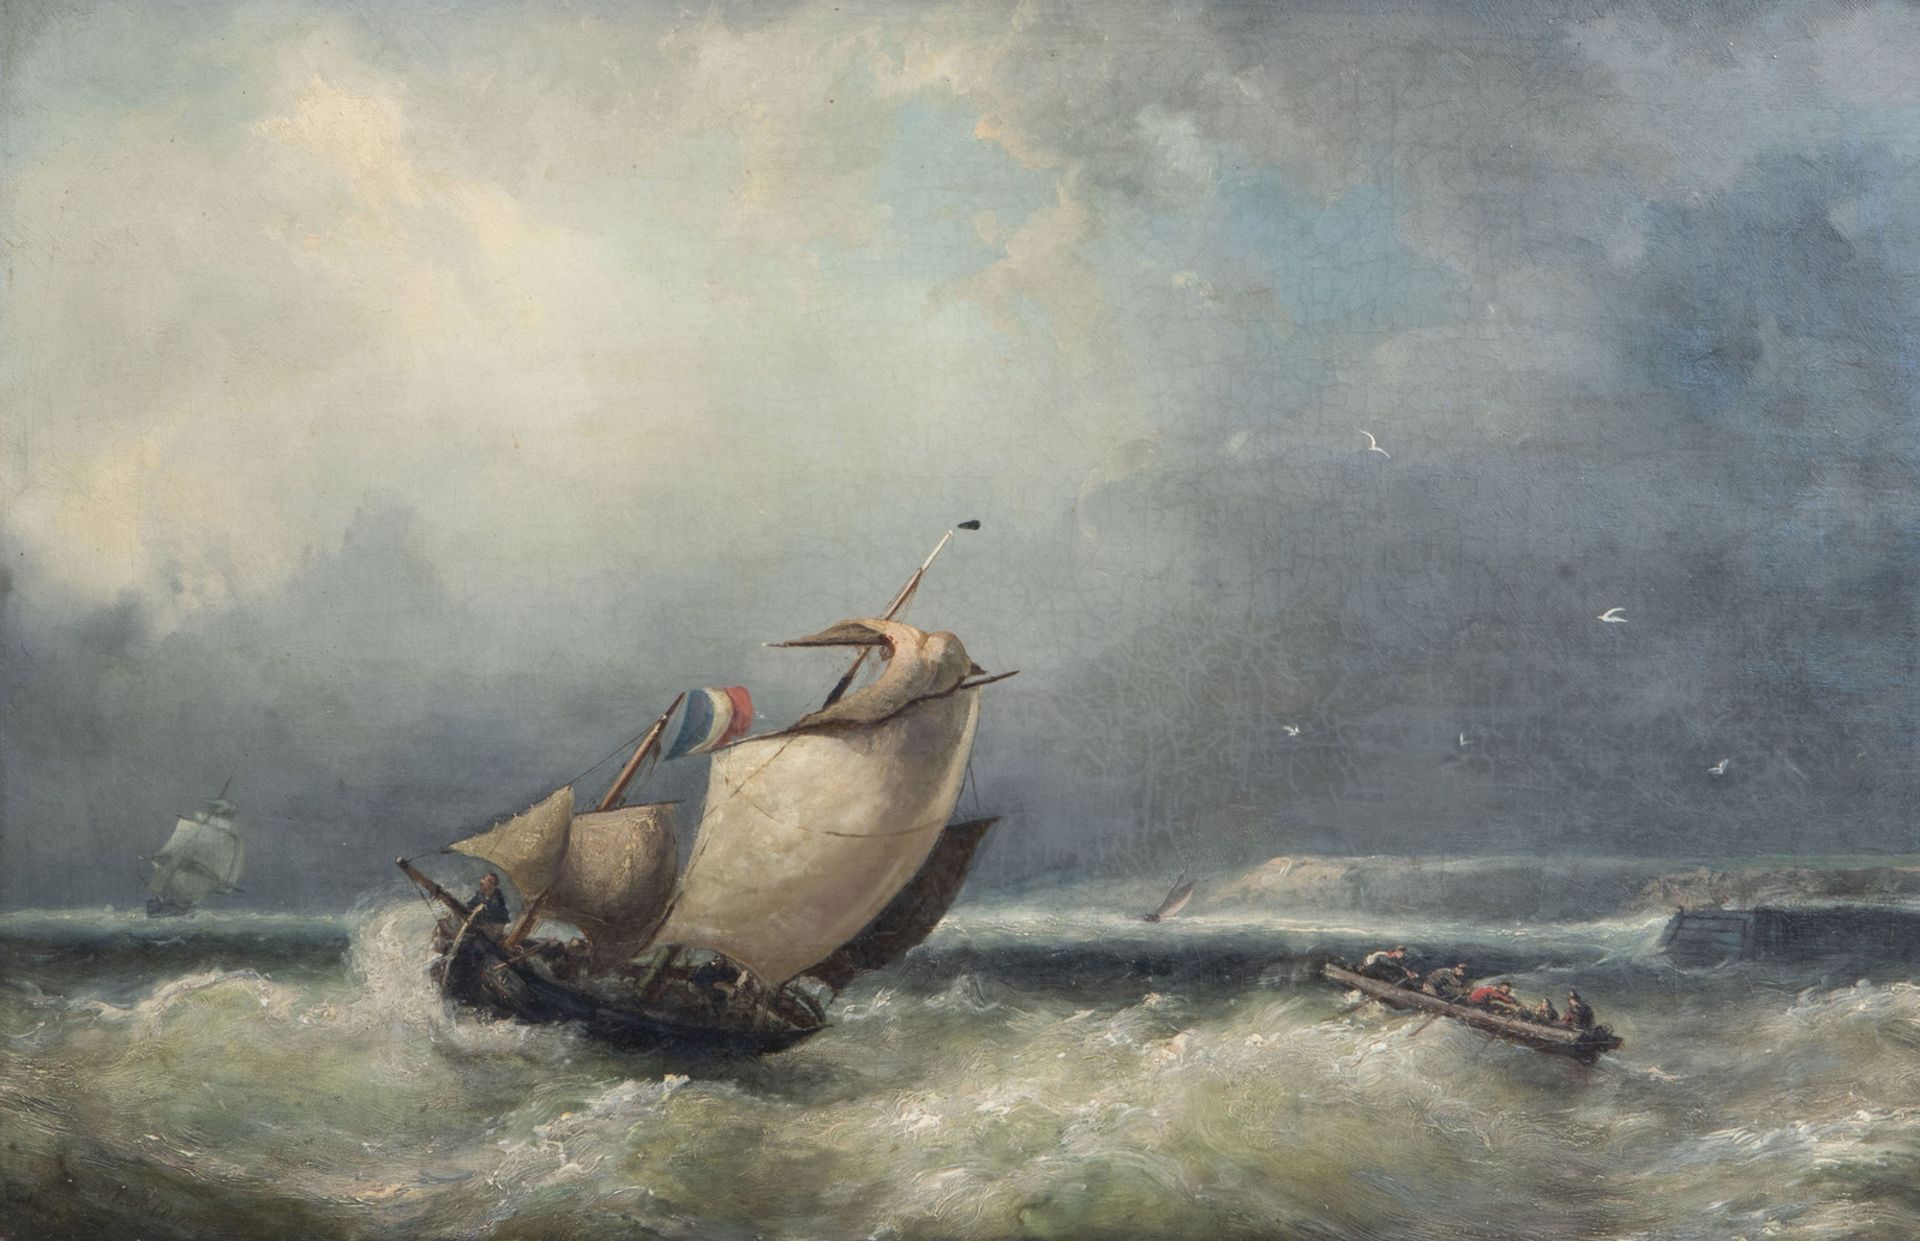 Nicholaas Riegen (1827-1899): Boats at see in a storm, oil on canvas